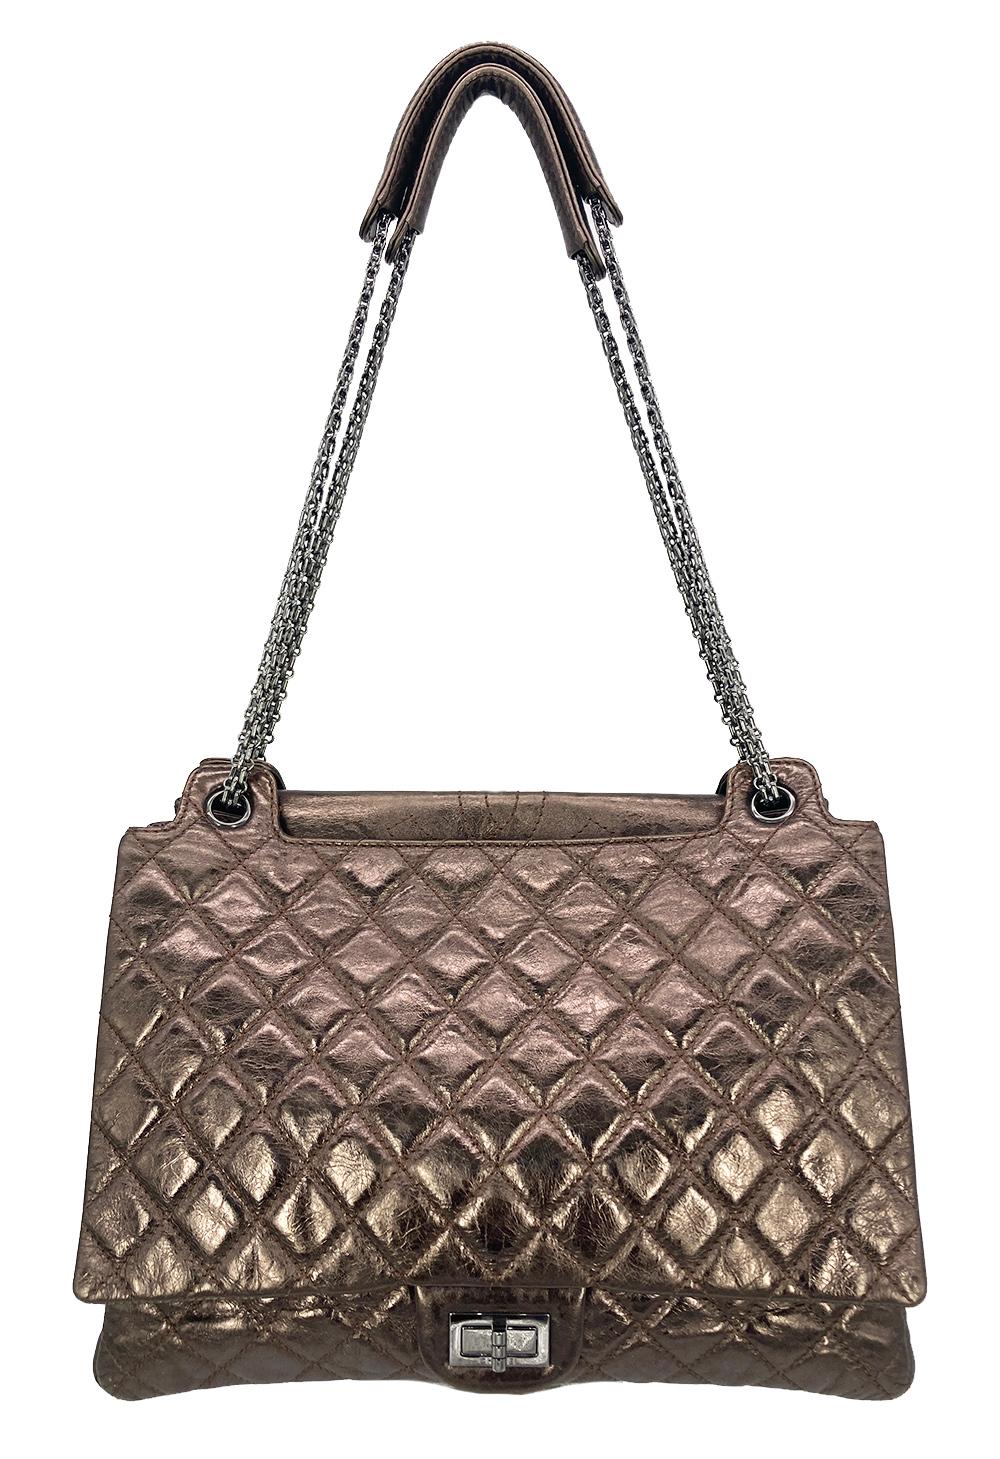 Chanel Metallic Bronze Quilted Leather Classic Flap Shopping Tote For Sale 1